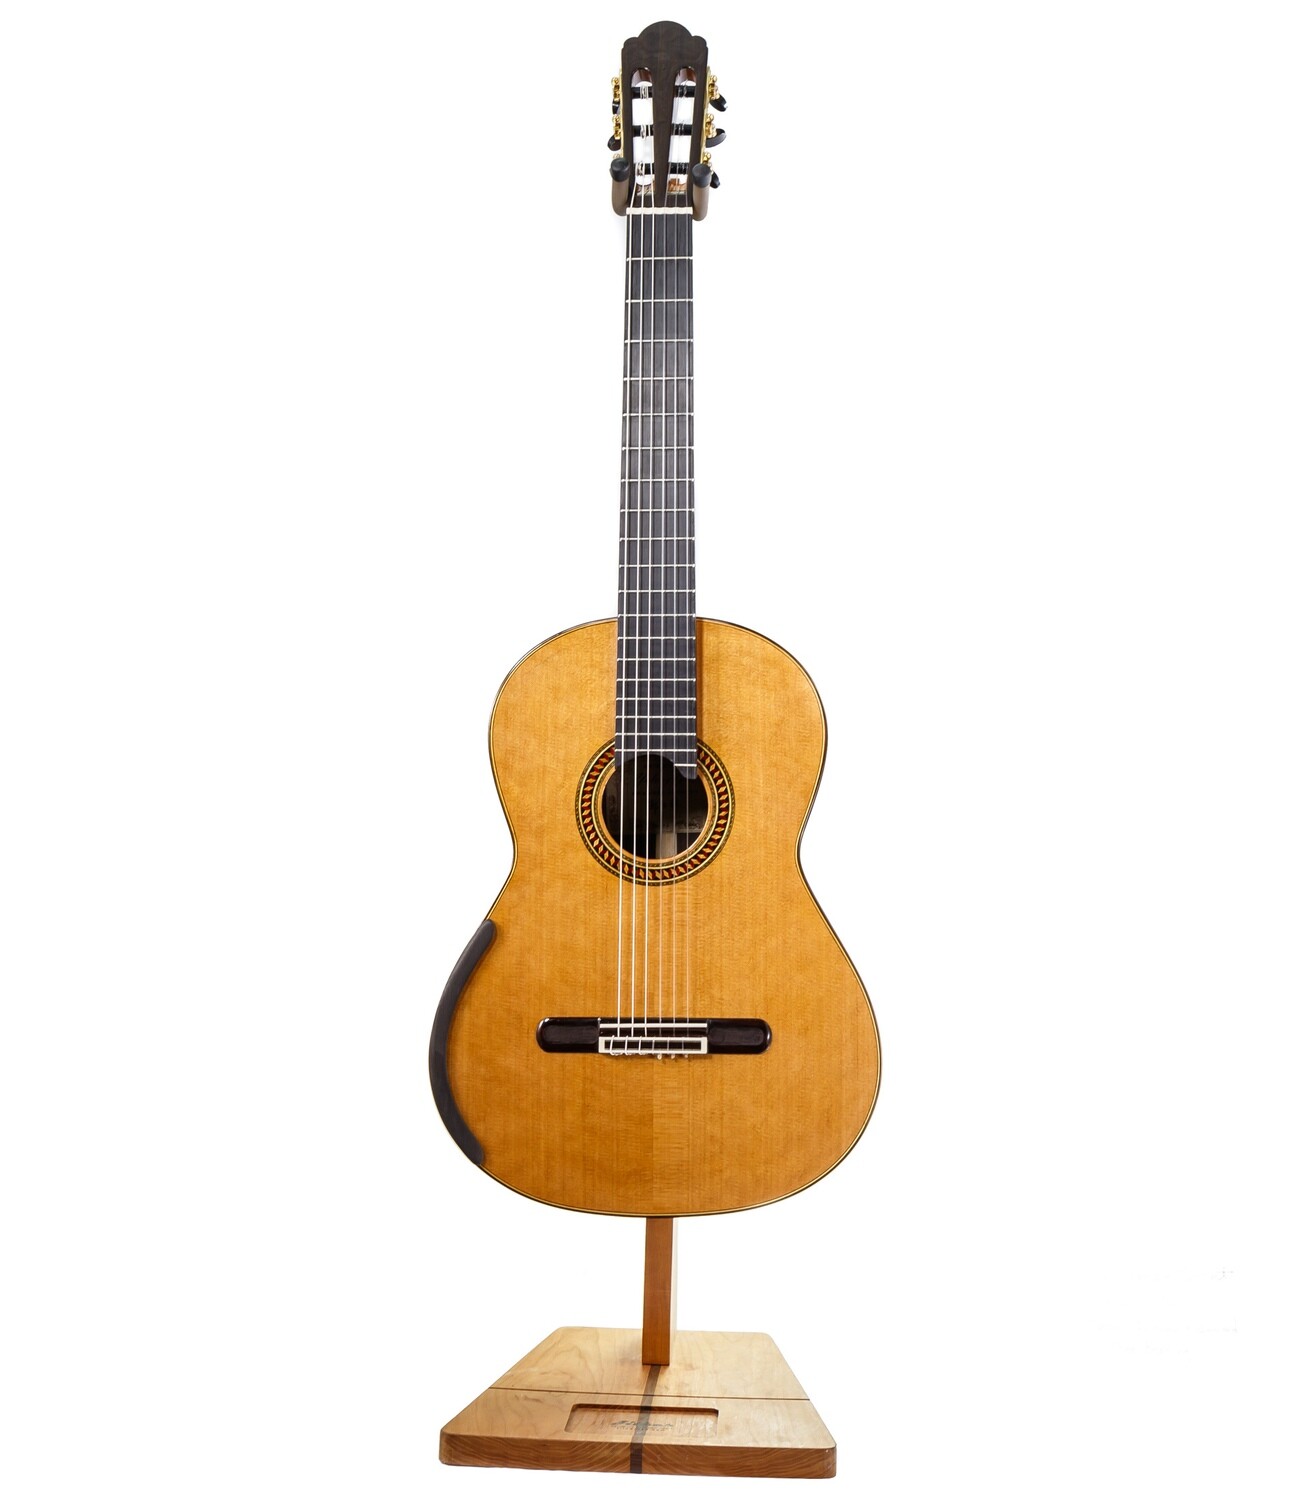 Chamber Concert by Yulong Guo - Cedar Double Top, Solid Indian Rosewood Back/Sides - 650mm Scale Length